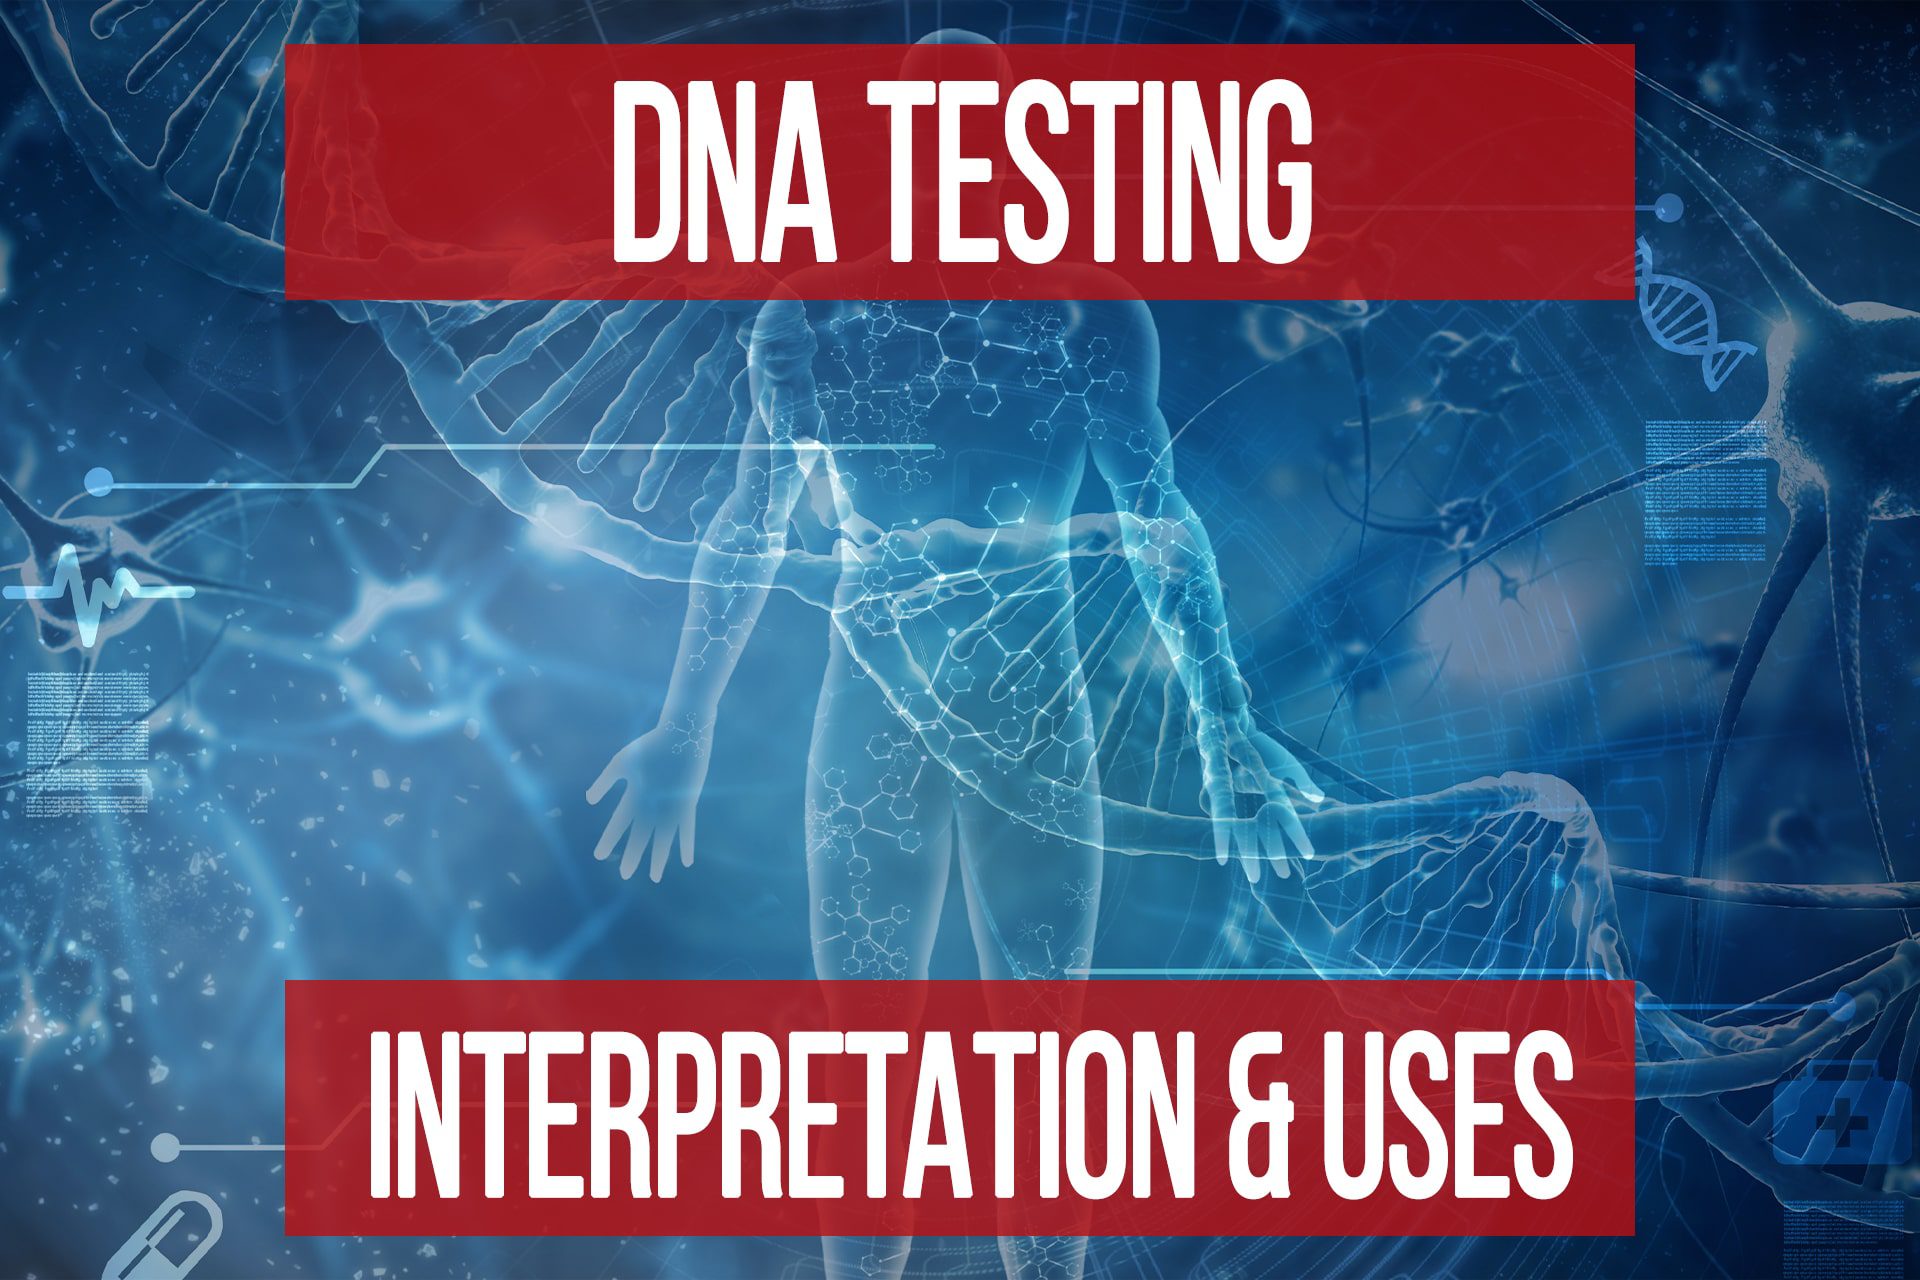 dna-testing-how-much-should-it-influence-your-program-n1-training